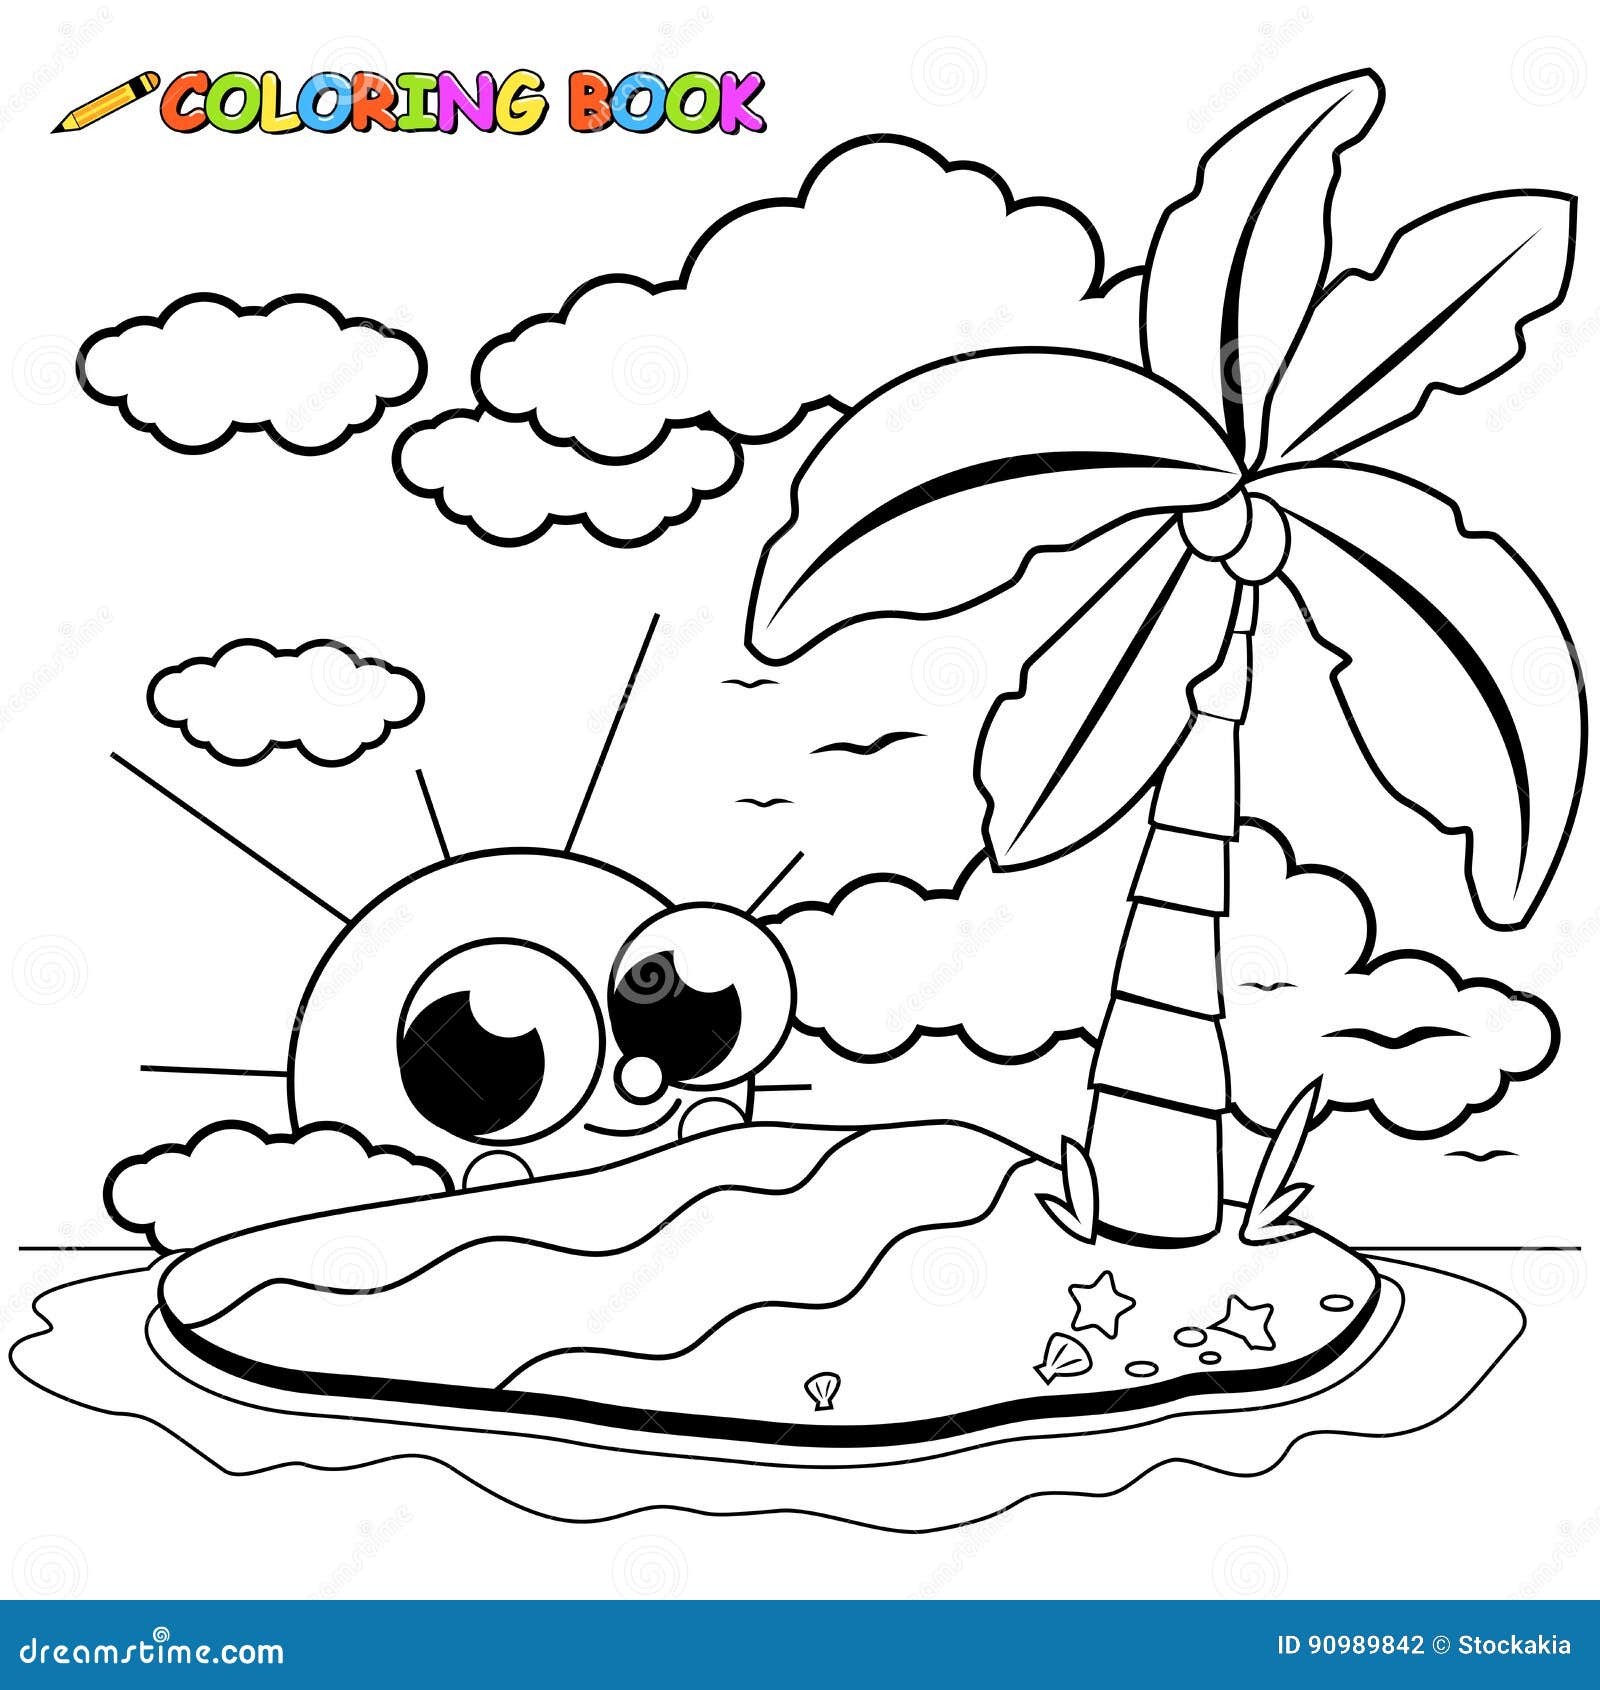 Deserted Island Coloring Book Page Stock Vector - Illustration of book